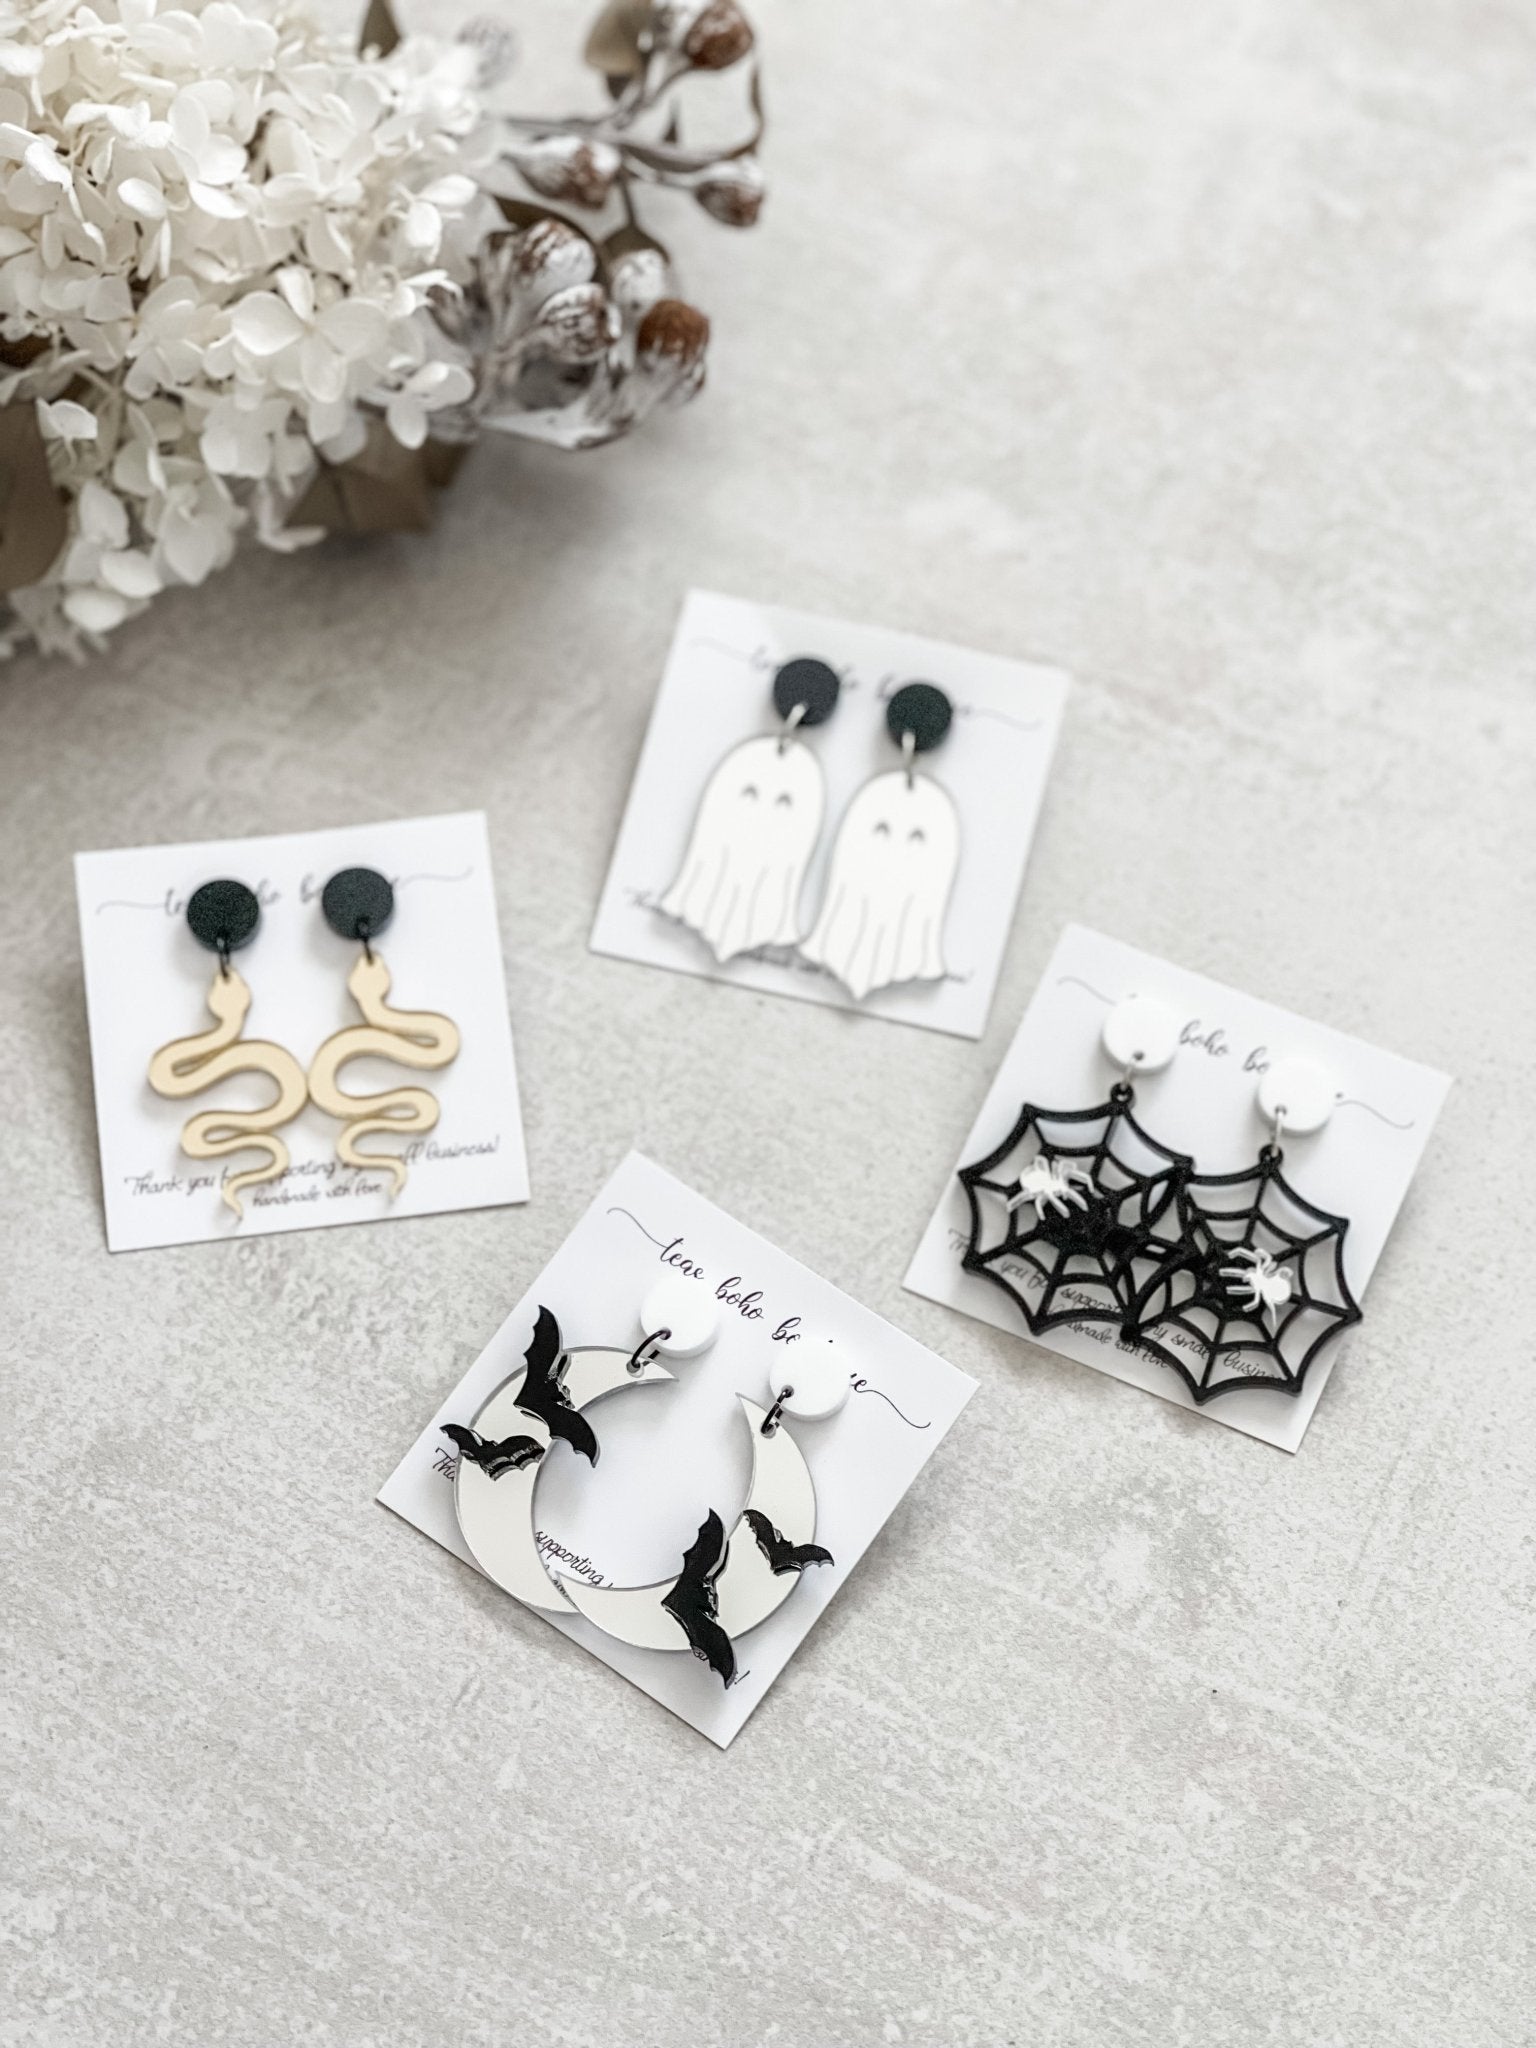 Ghost Earrings - The Humble Gift Co.